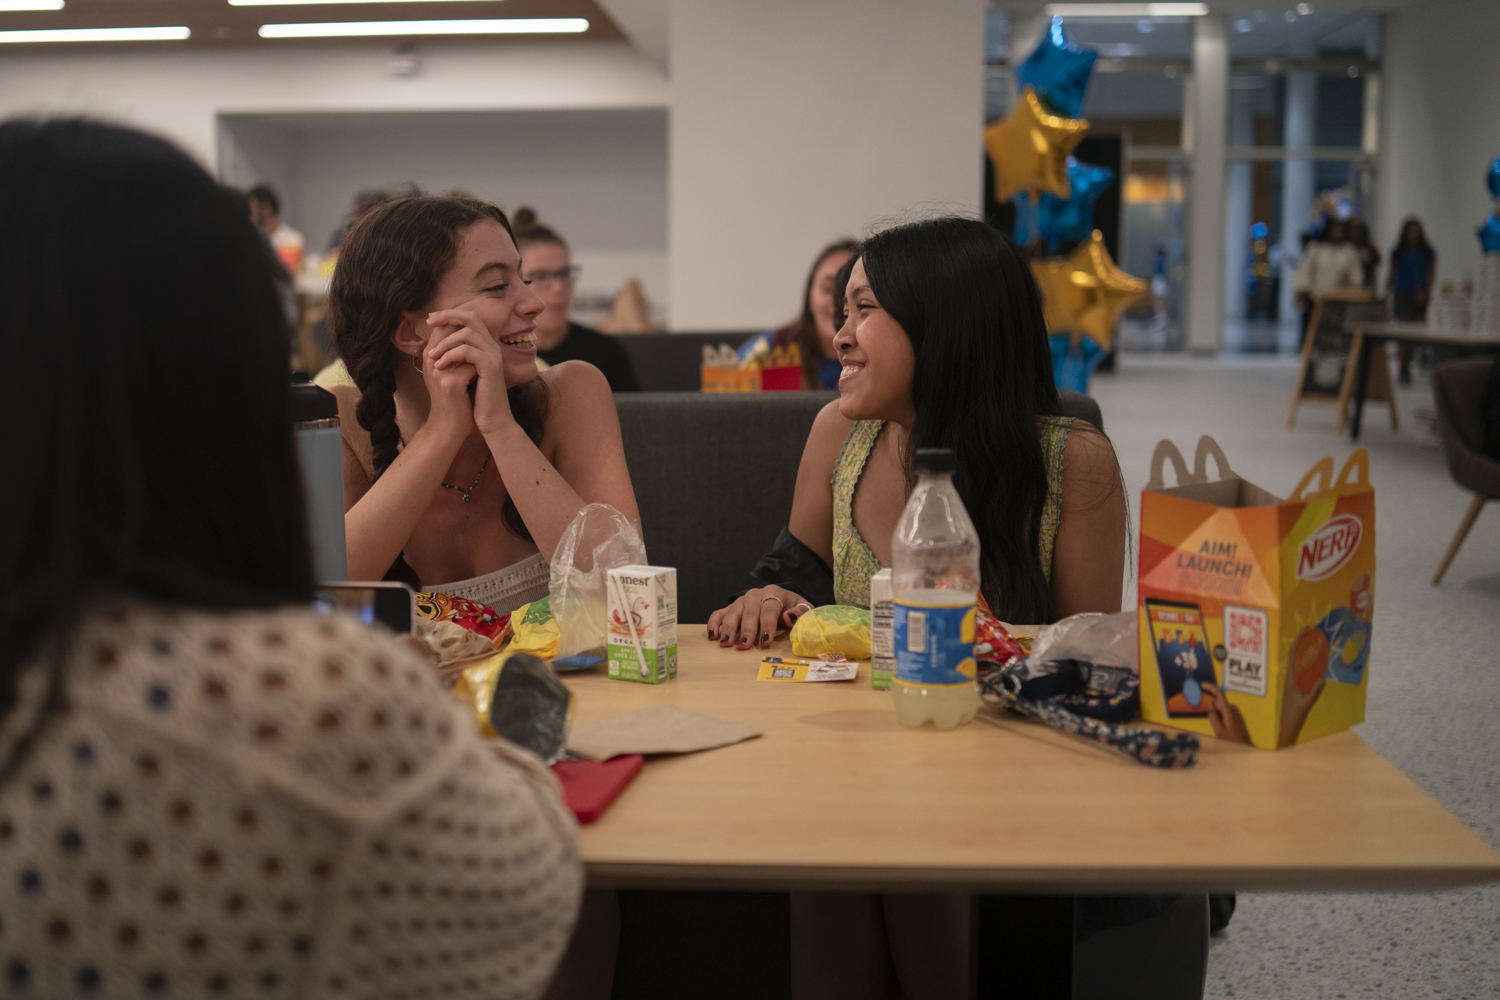 Students share a meal together at the University Student Center.